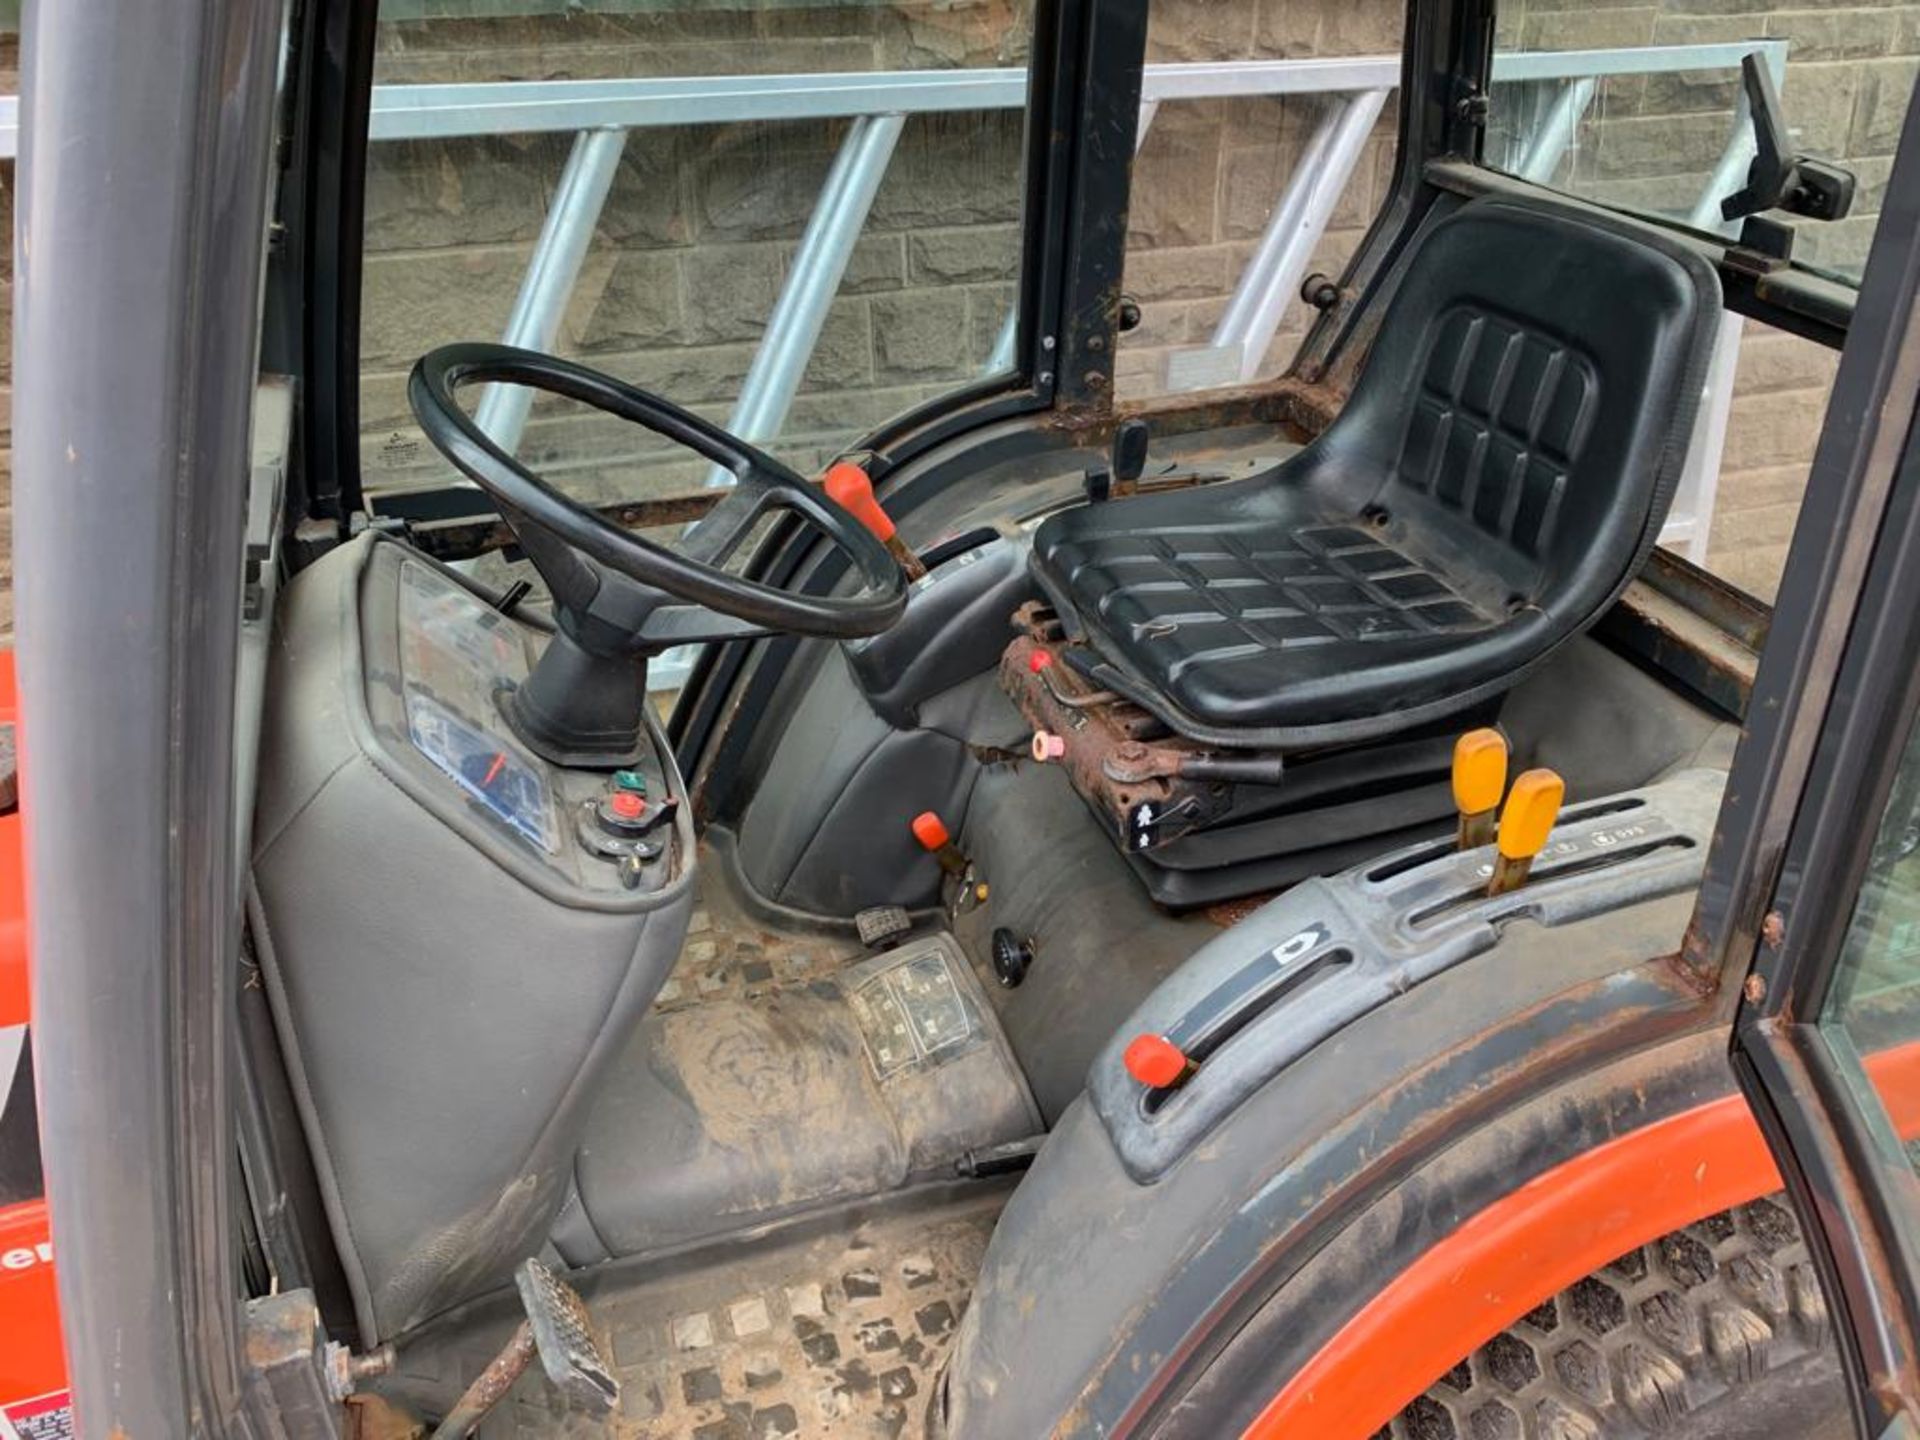 2000/X REG KUBOTA B2100 COMPACT TRACTOR WITH FULL GLASS CAB C/W PLOUGH ATTACHMENT *PLUS VAT* - Image 8 of 11